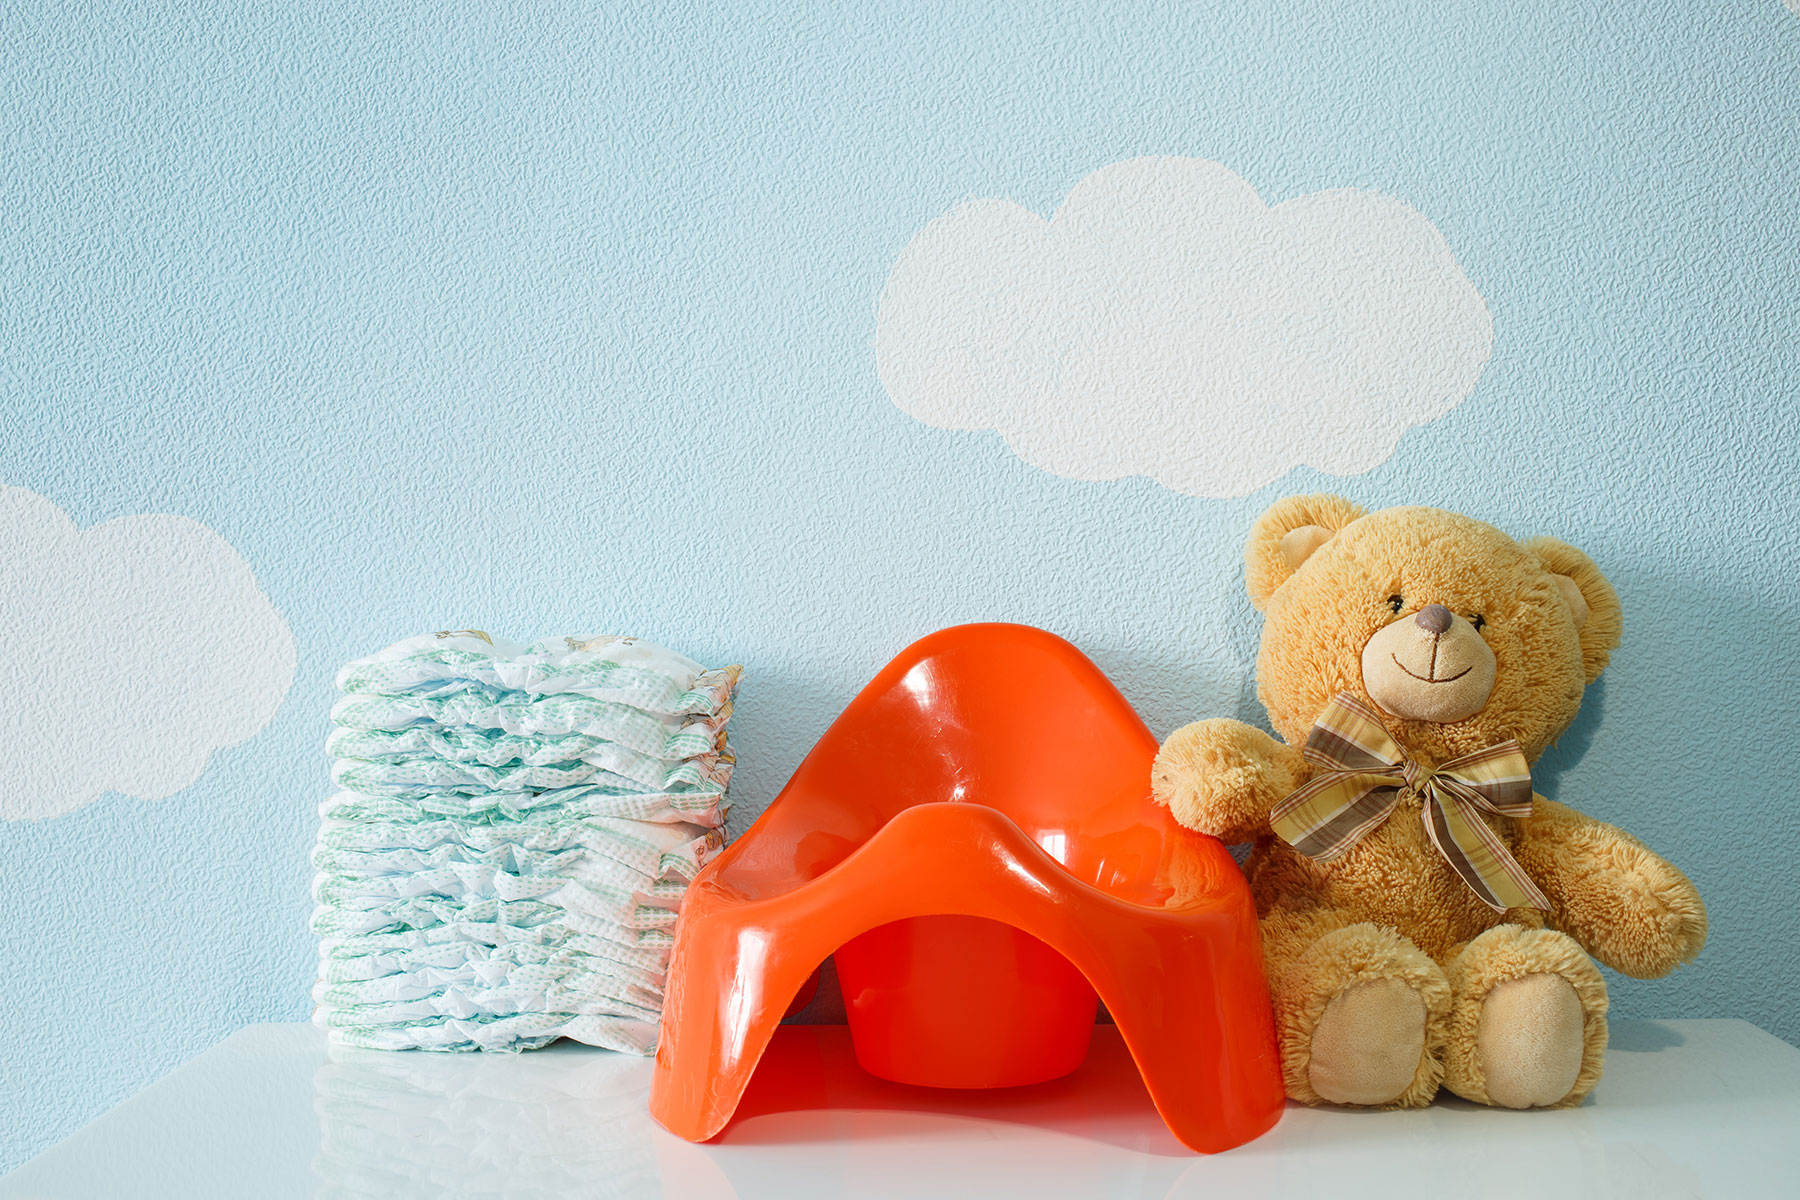 A photo of an orange potty next to a teddy bear and nappies. The background is a light blue wall with white clouds